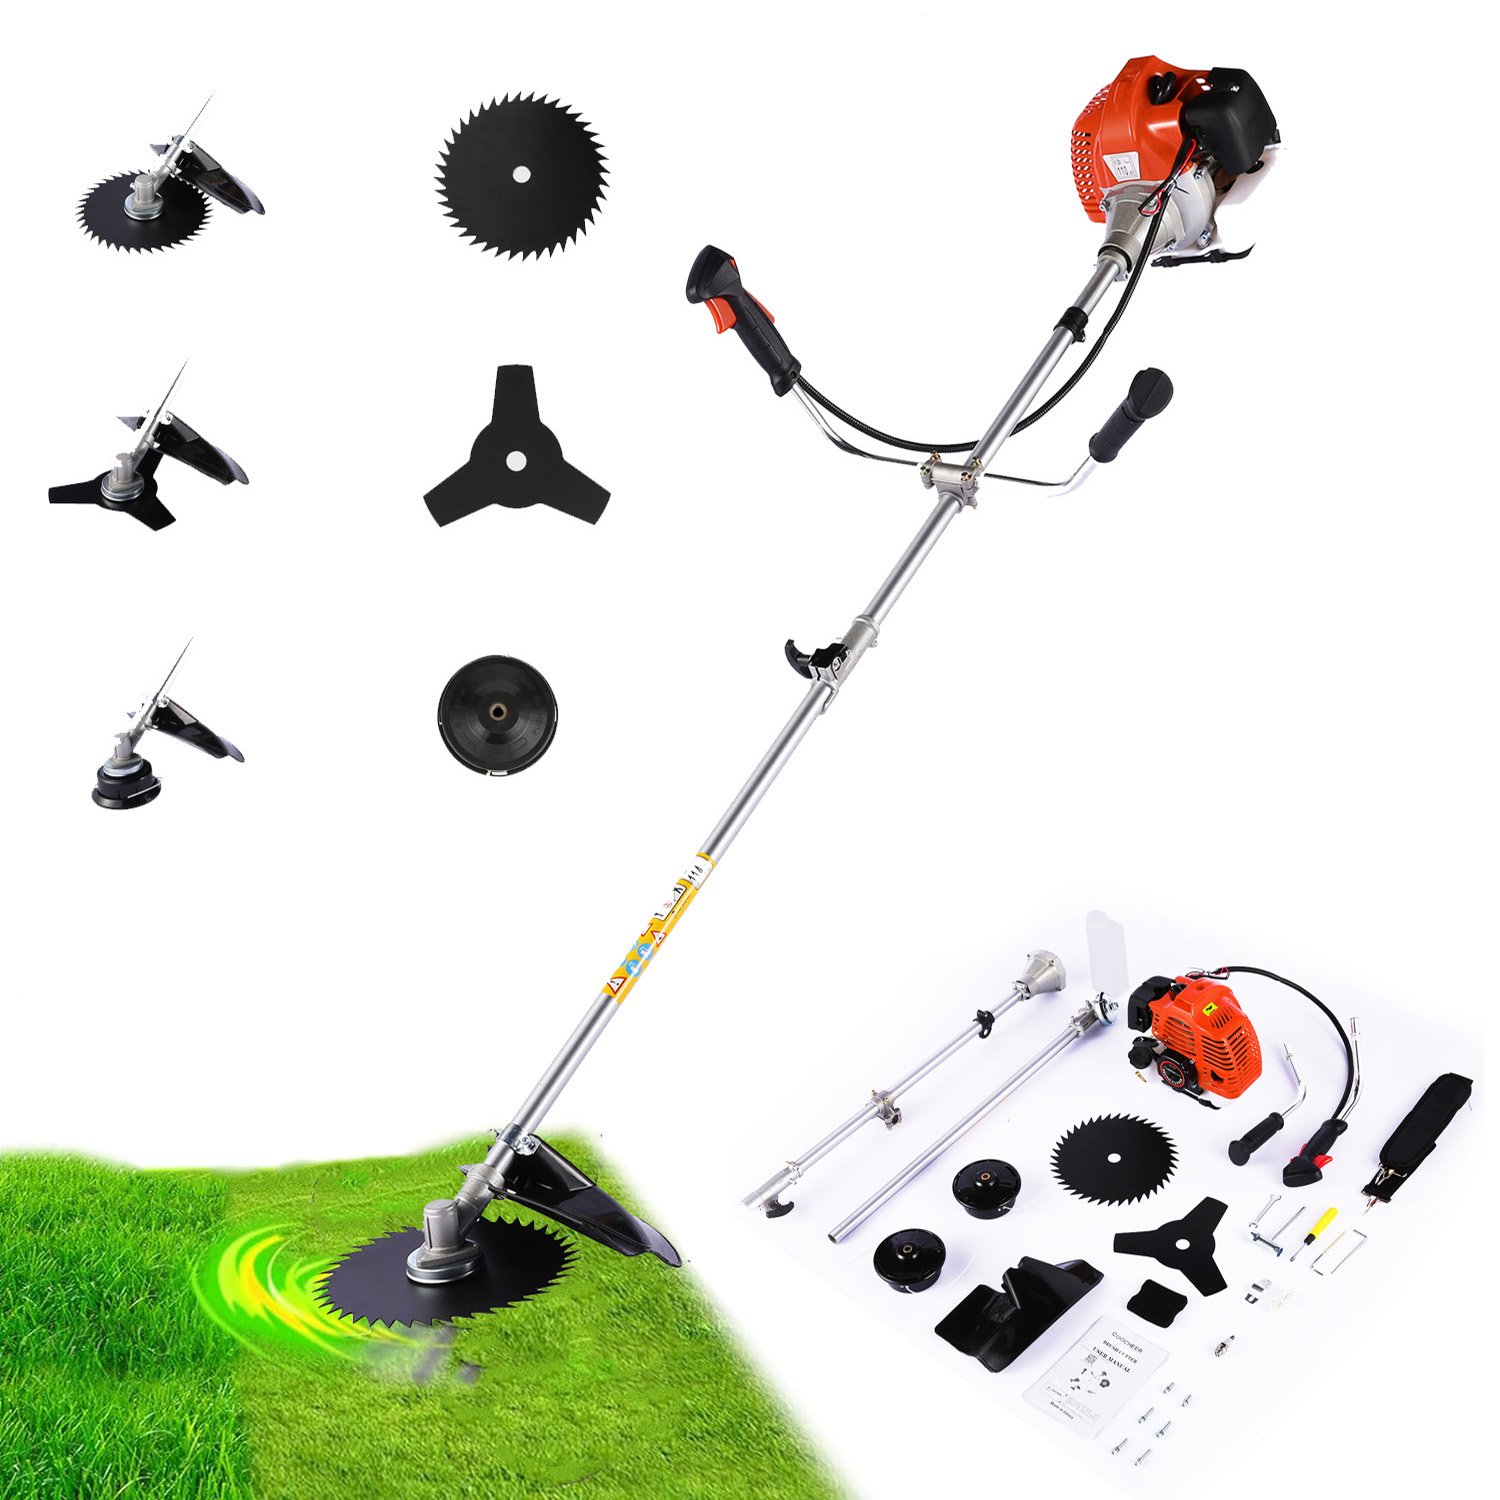 

58cc Gas String Trimmer, Straight Shaft Gasoline Powered Grass Cutter, 4-in-1 Gas Powered, With 4 Detachable Head, Outdoor Backyard Lawn Care